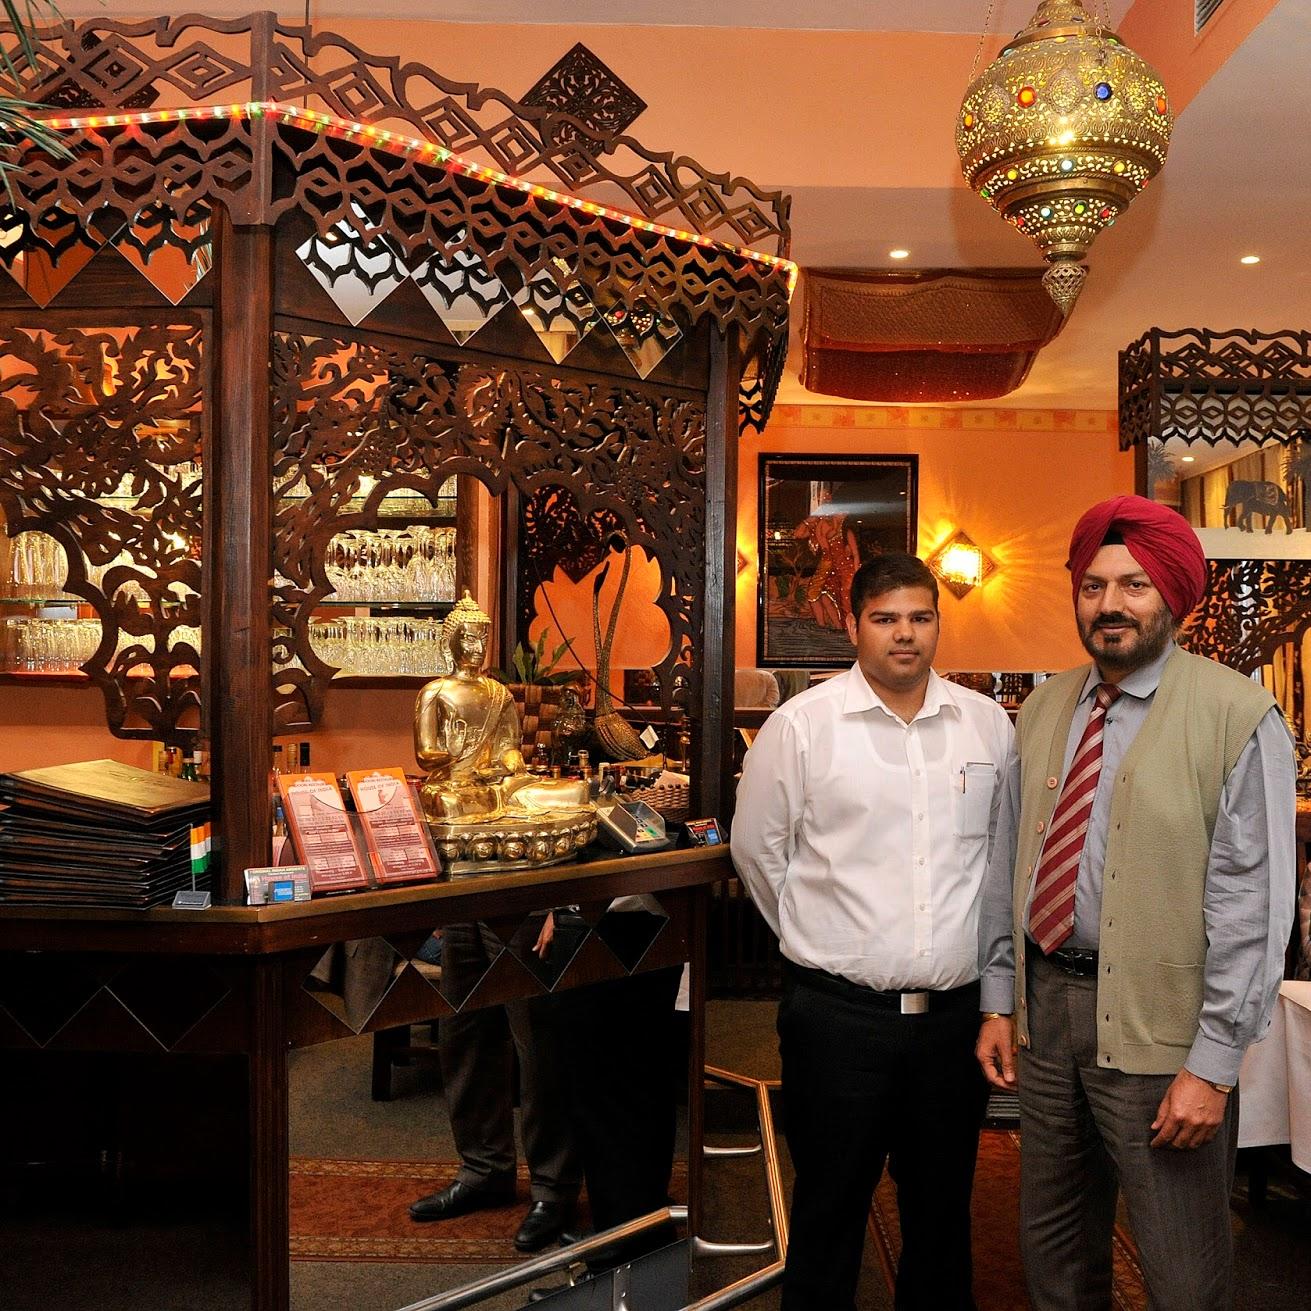 Restaurant "House of India" in Mannheim